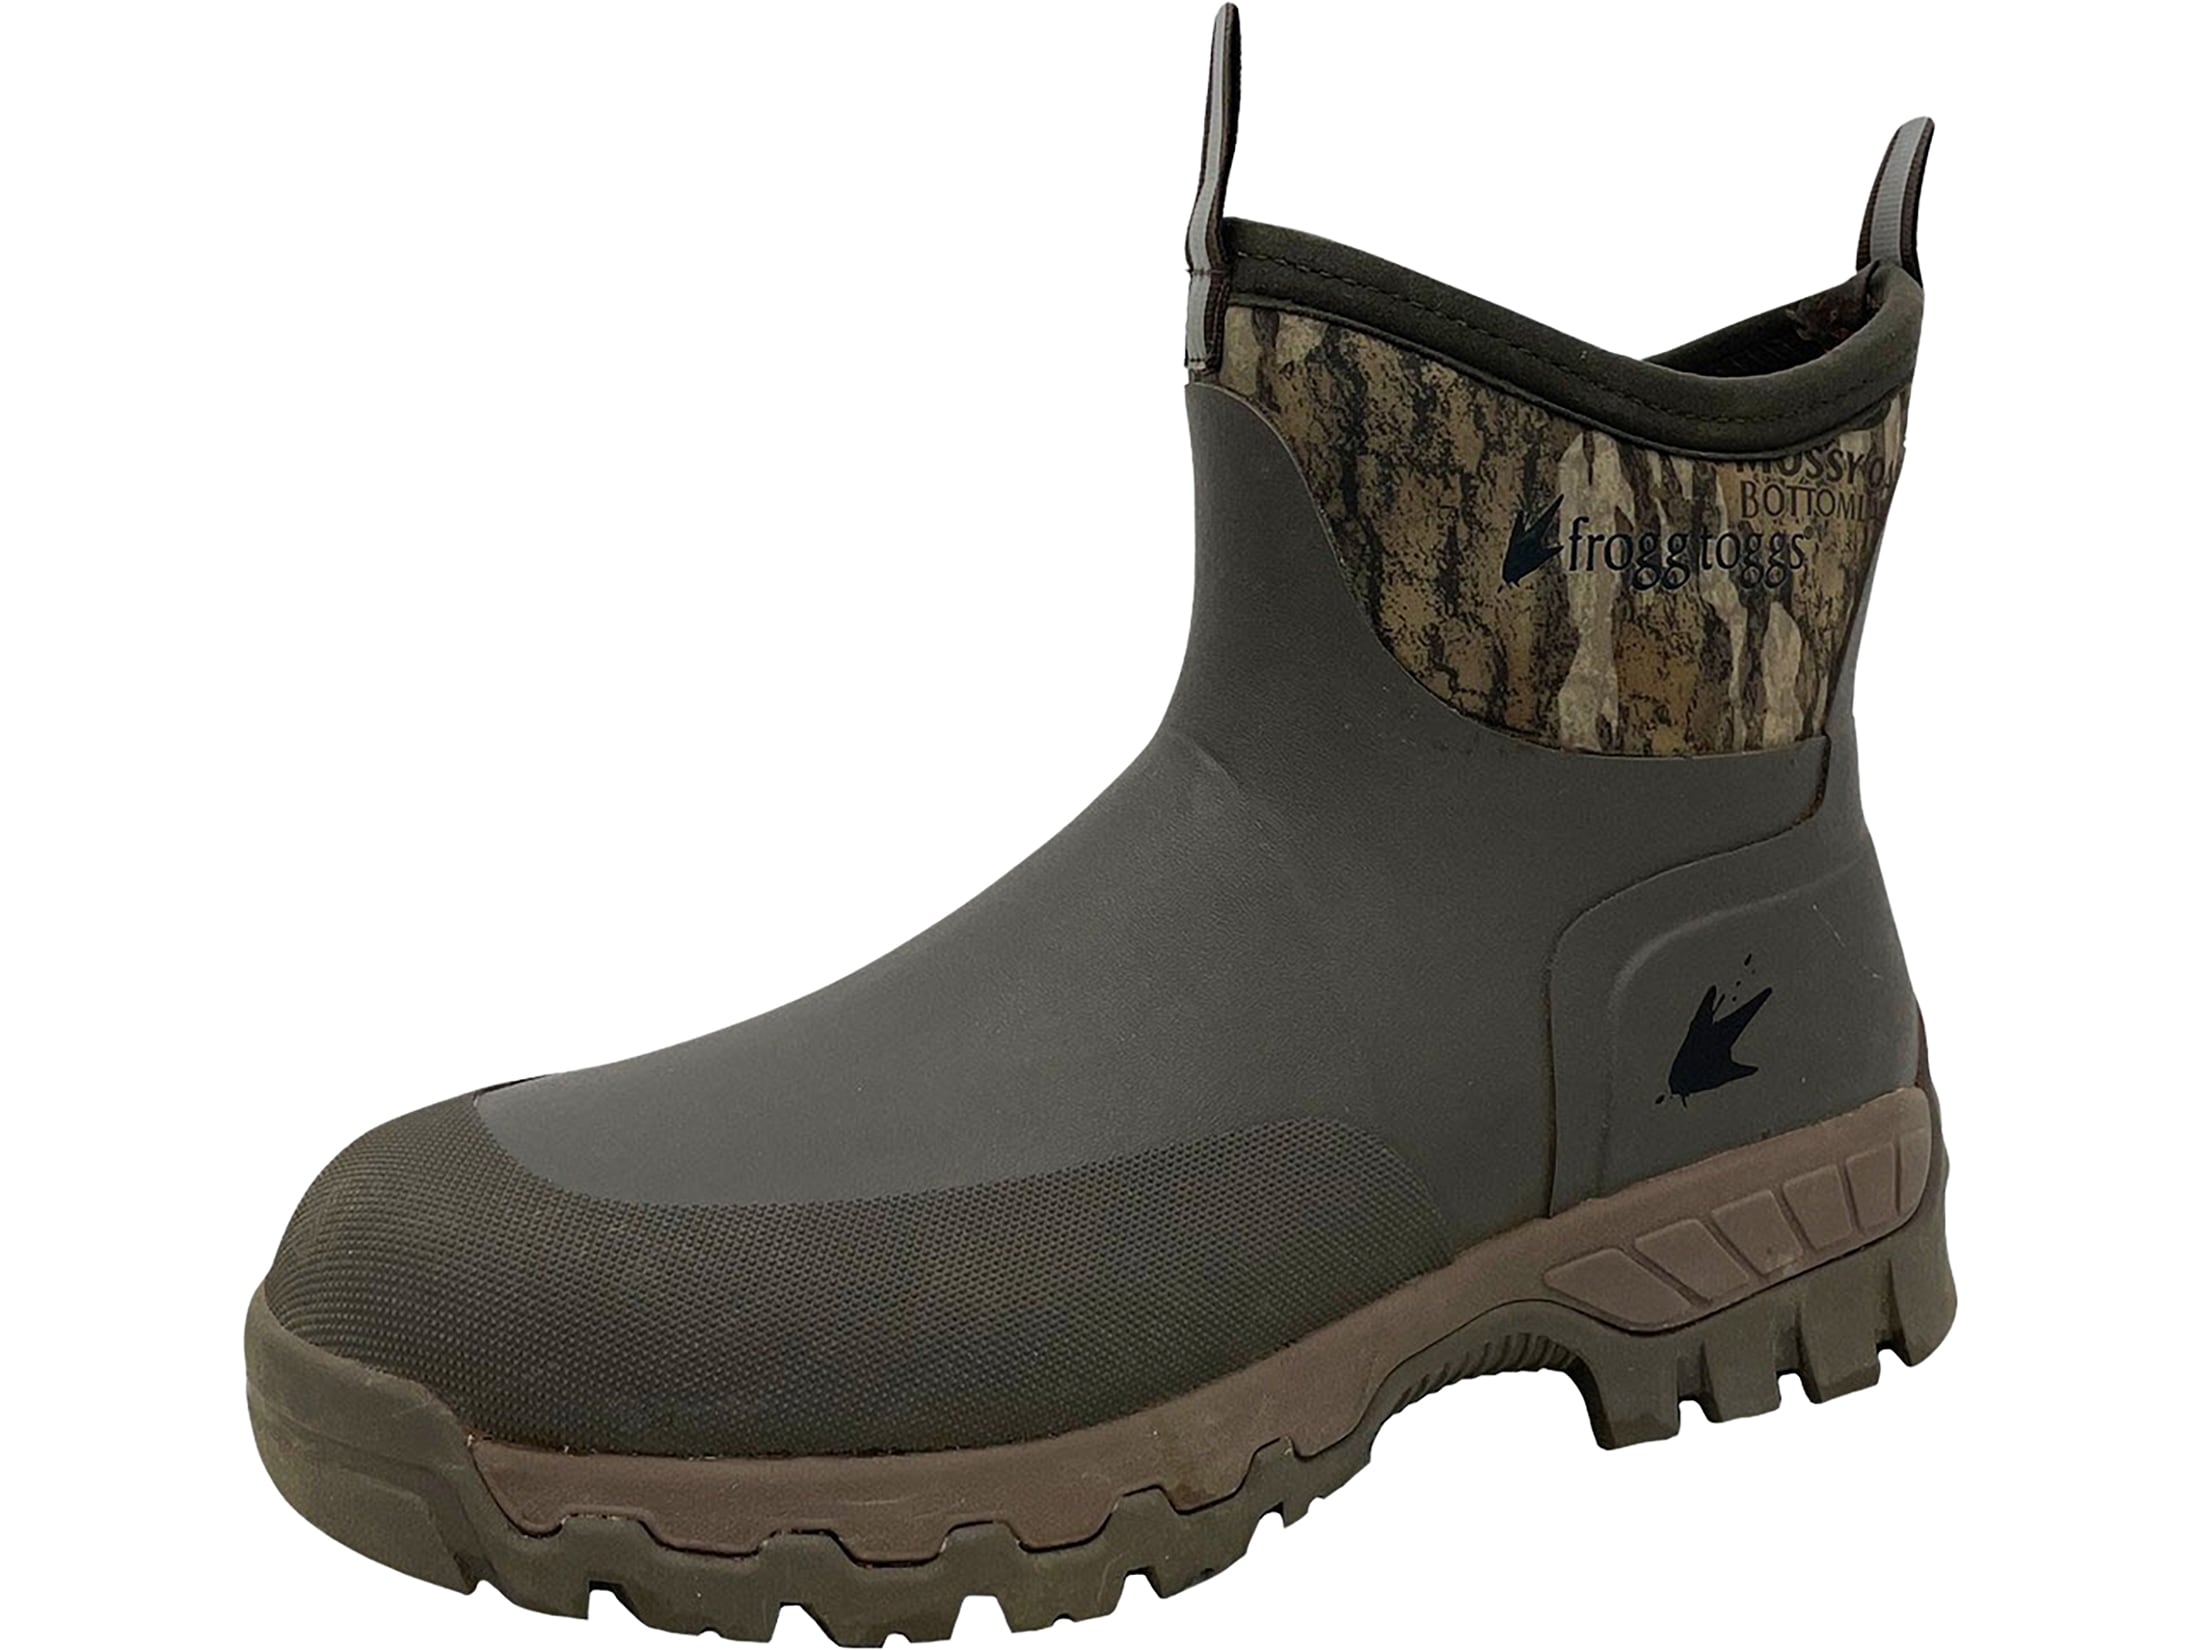 Frogg Toggs Ridge Buster Ankle 7.5 Rubber Boots Neoprene Brown Men's